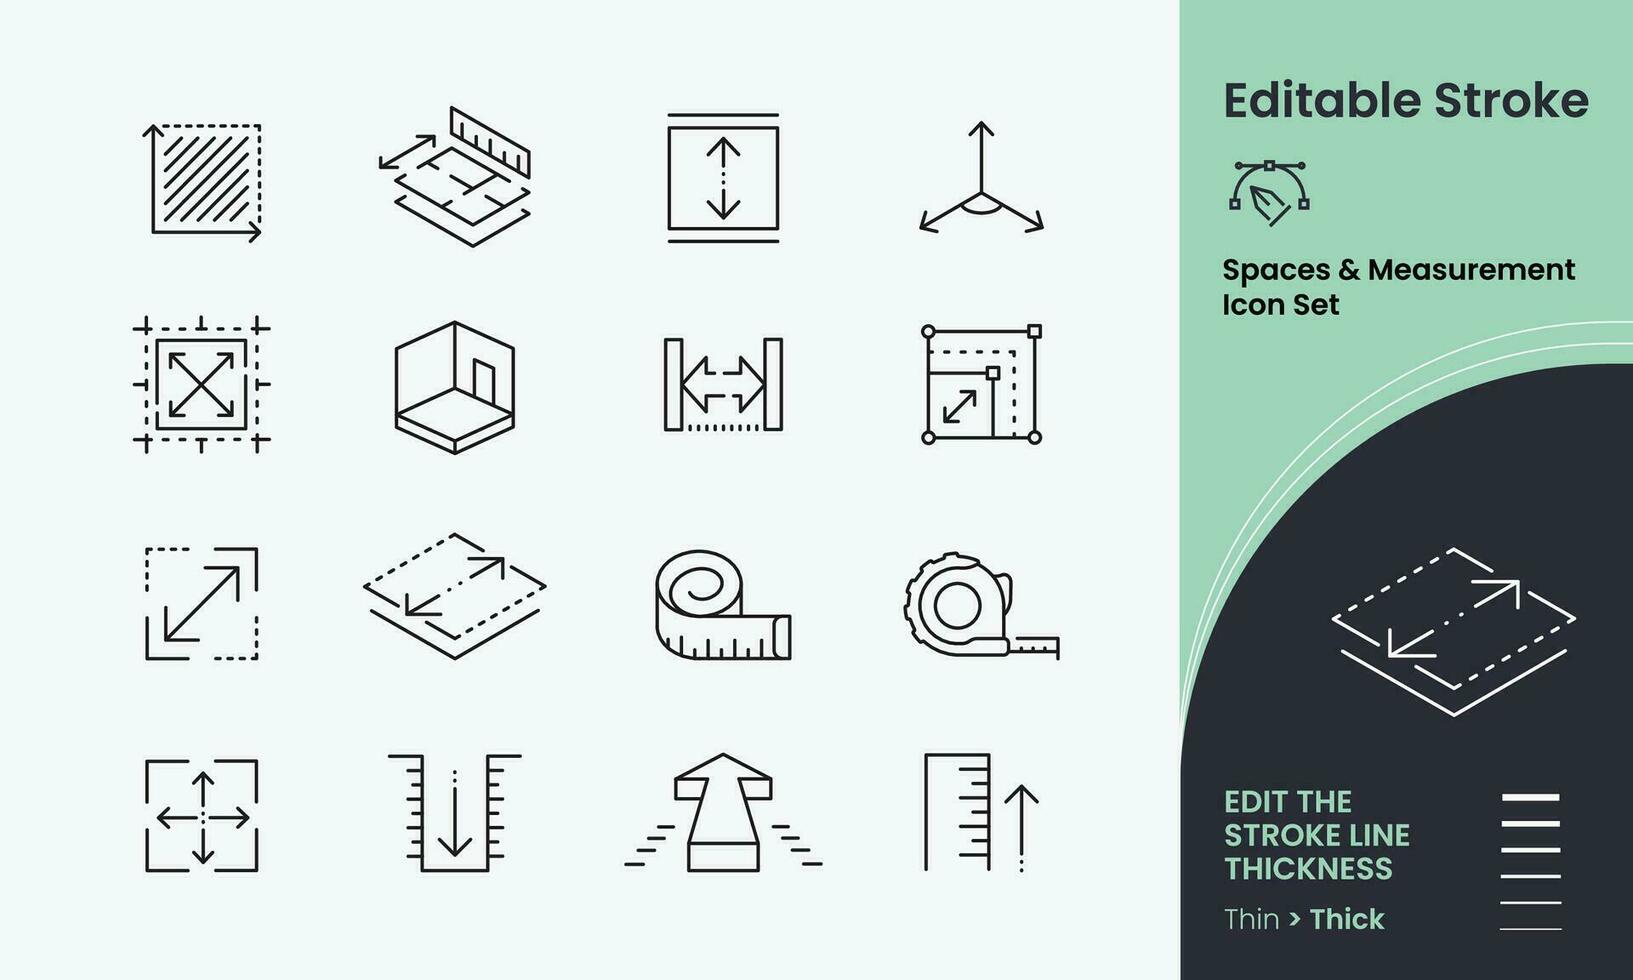 Spaces, Area and Measurement Icon collection containing 16 editable stroke icons. Perfect for logos, stats and infographics. Edit the thickness of the line in any vector capable app.